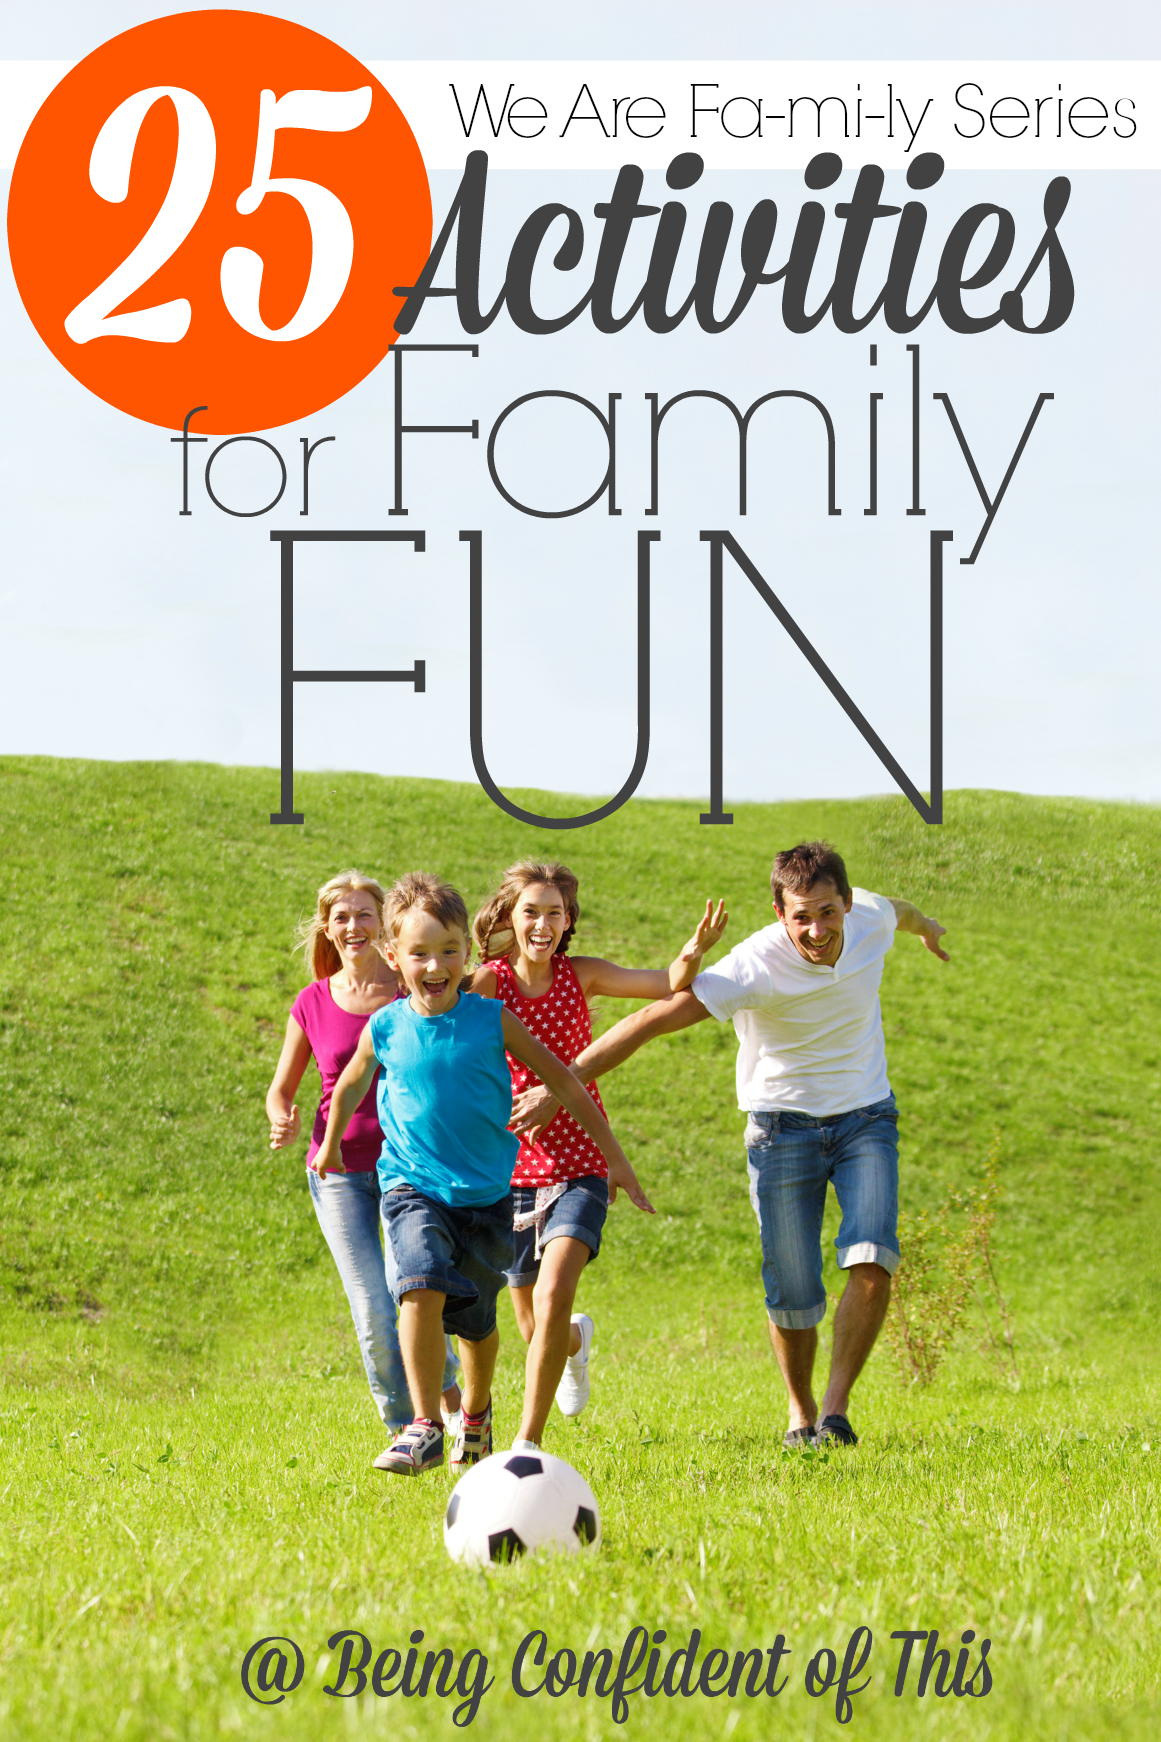 Nothing helps to keep a family close quite like spending time together and having fun. Want to create fun memories with your children? Try one of these 25 activities for your next family fun day or night! From the We Are Fa-mi-ly Series at Being Confident of This